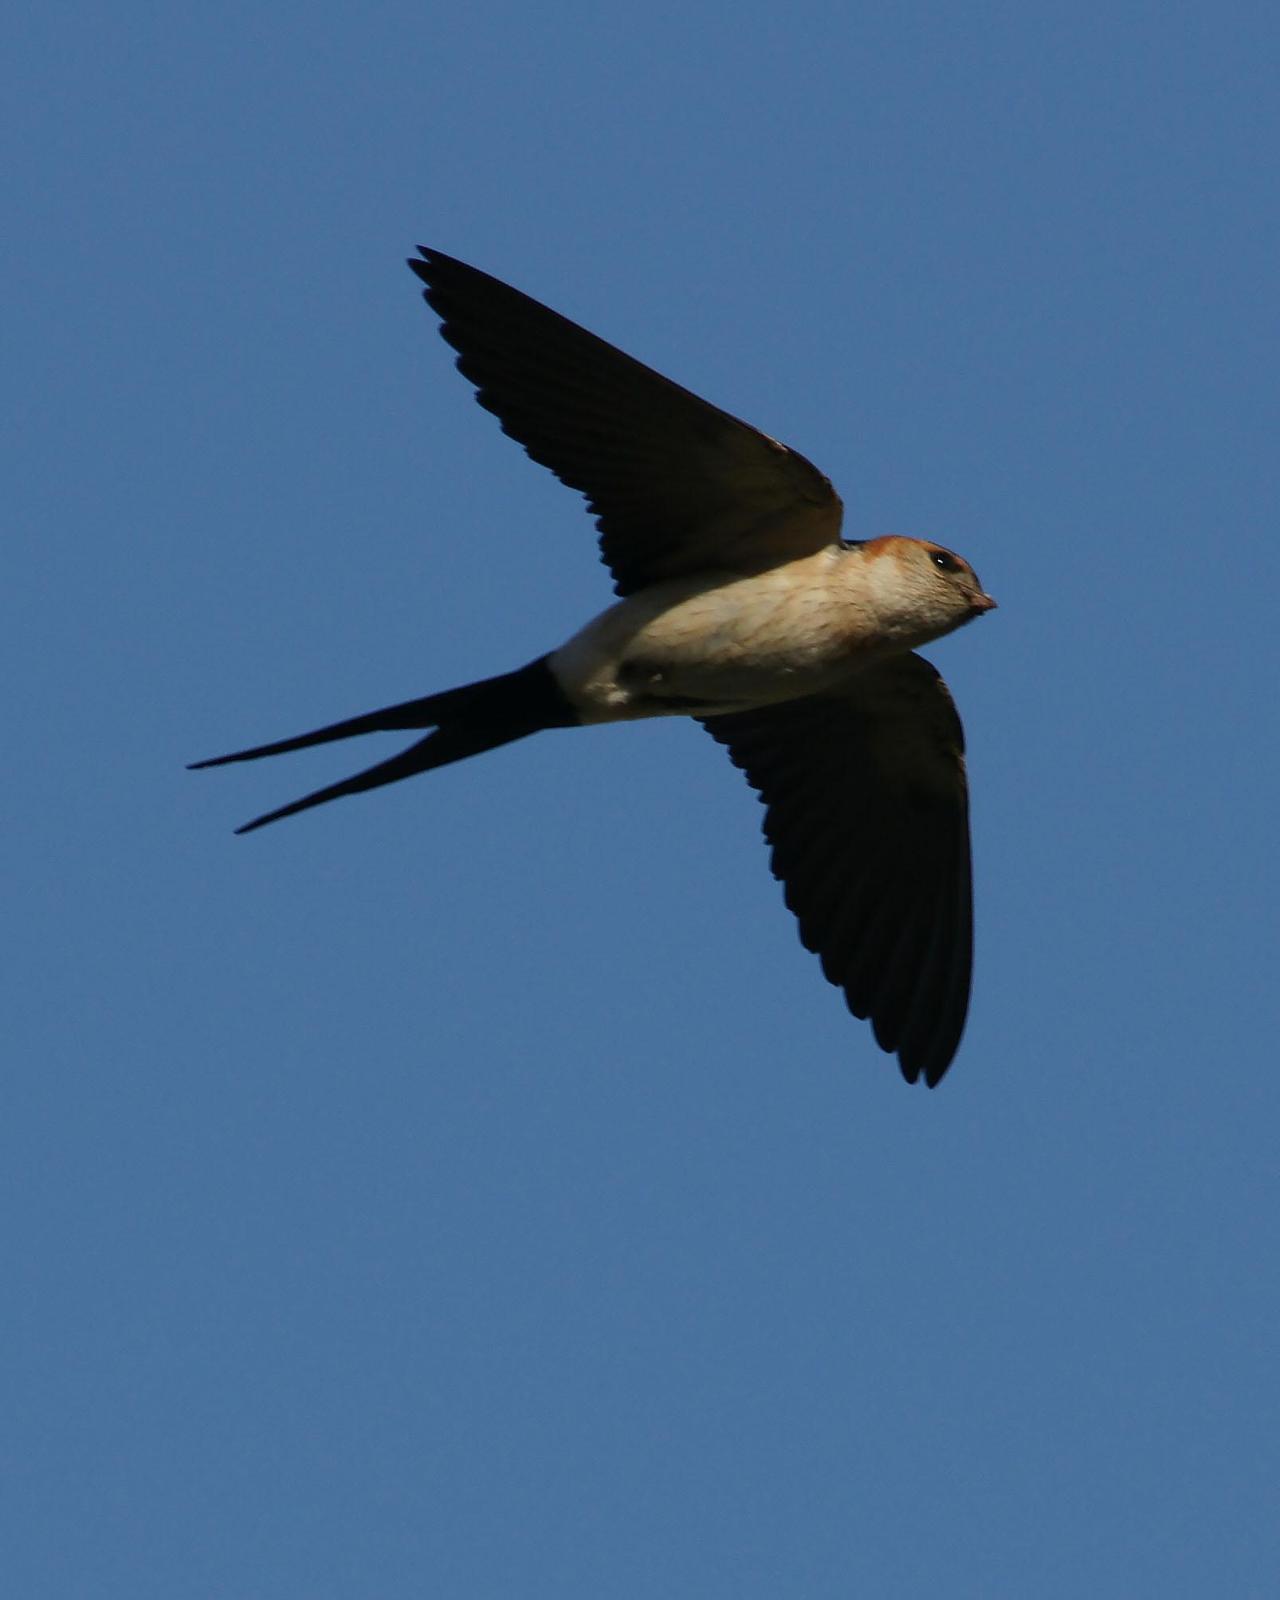 Red-rumped Swallow Photo by Steve Percival